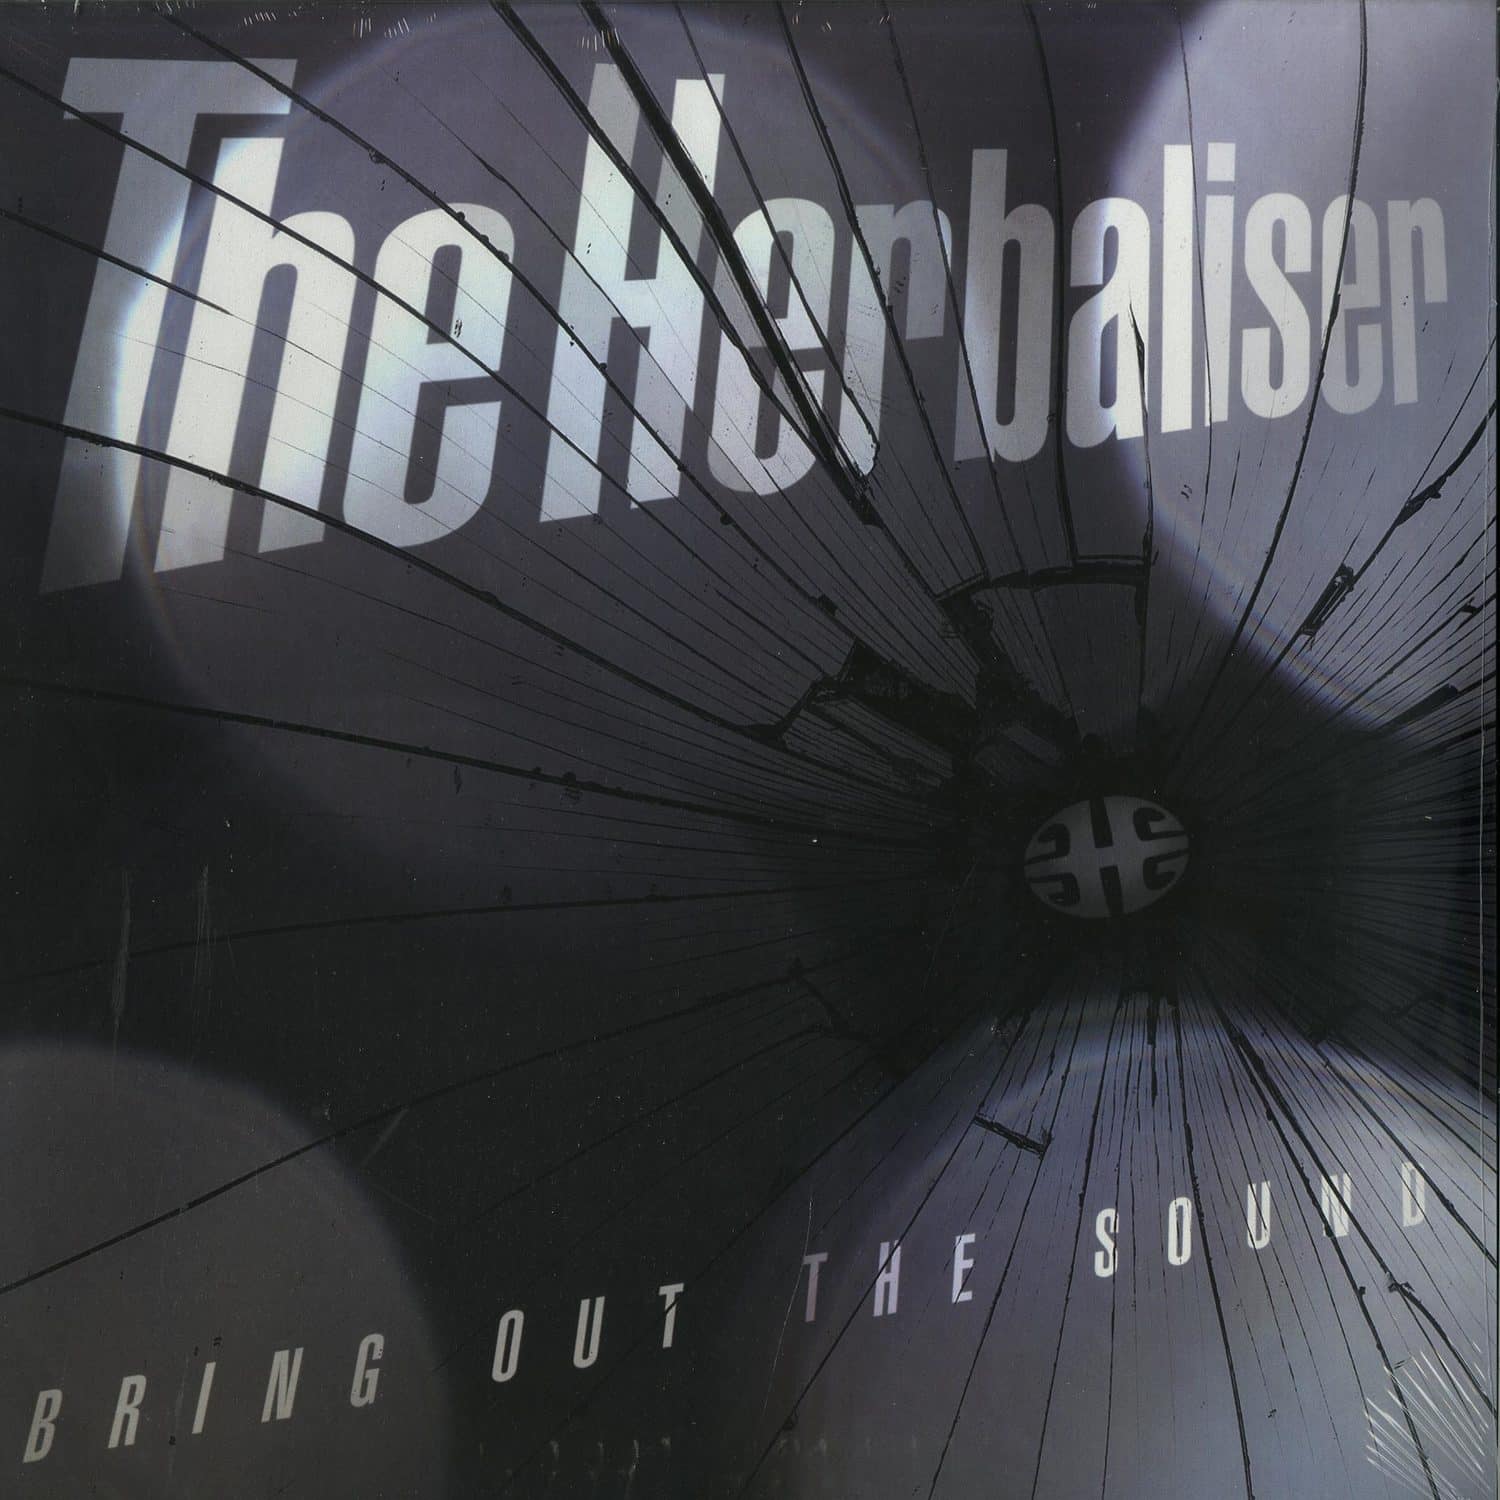 The Herbaliser - BRING OUT THE SOUND 